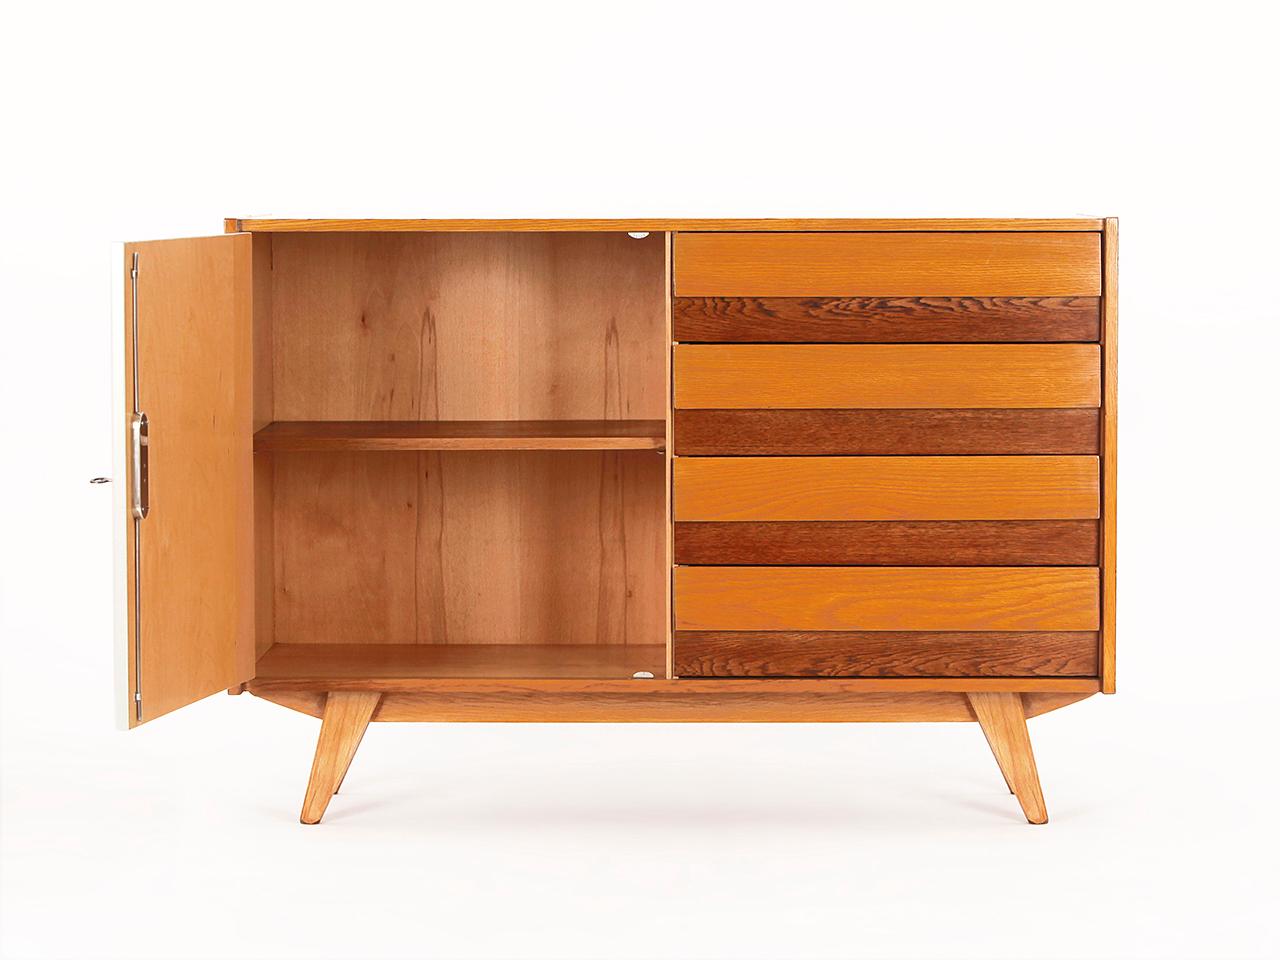 Midcentury sideboard by Jiri Jiroutek for Interier Praha, dating from the 1960s, with four drawers and gray doors, from the former Czechoslovakia. Completely restored and repainted. Delivery time 3-4 weeks.
 